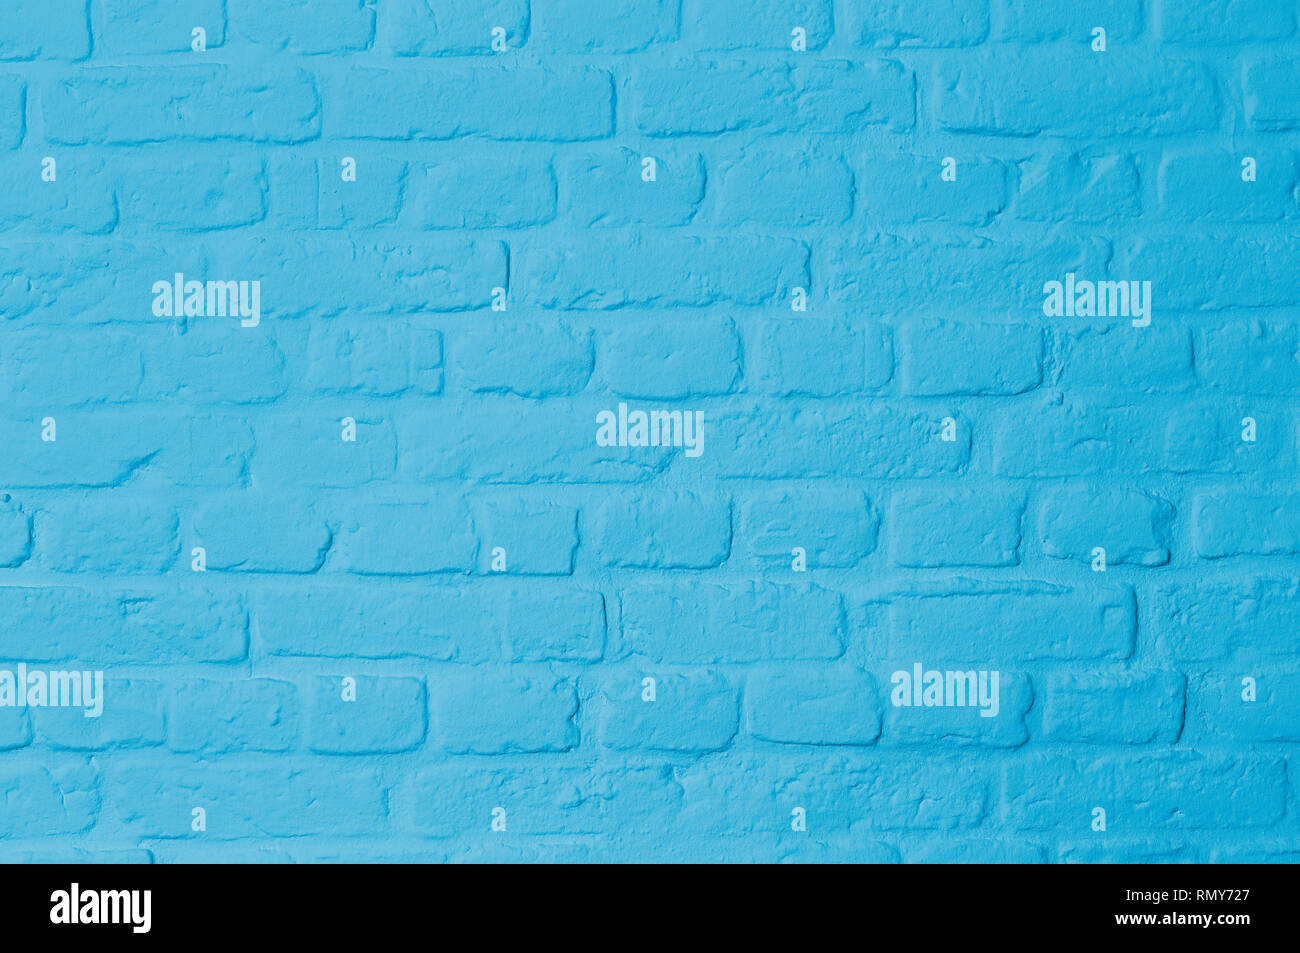 Brickstone wall full frame, pastell blue colored, image background Stock Photo